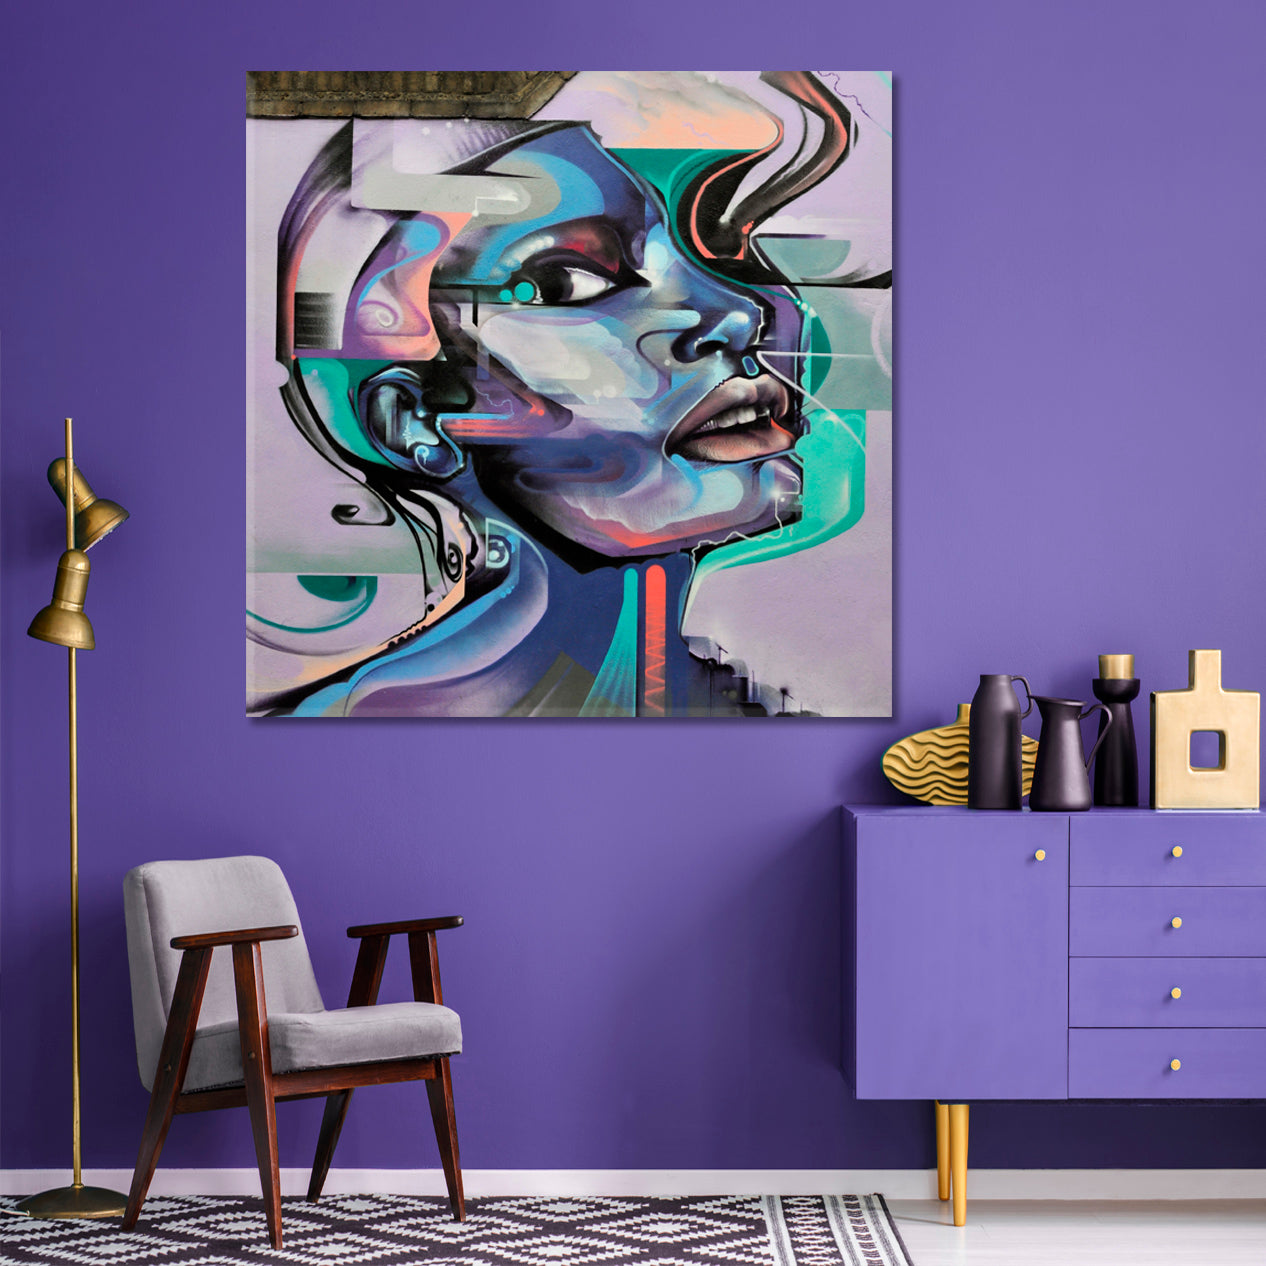 Abstract Art Woman Face Portrait Street Art | Square People Portrait Wall Hangings Artesty   